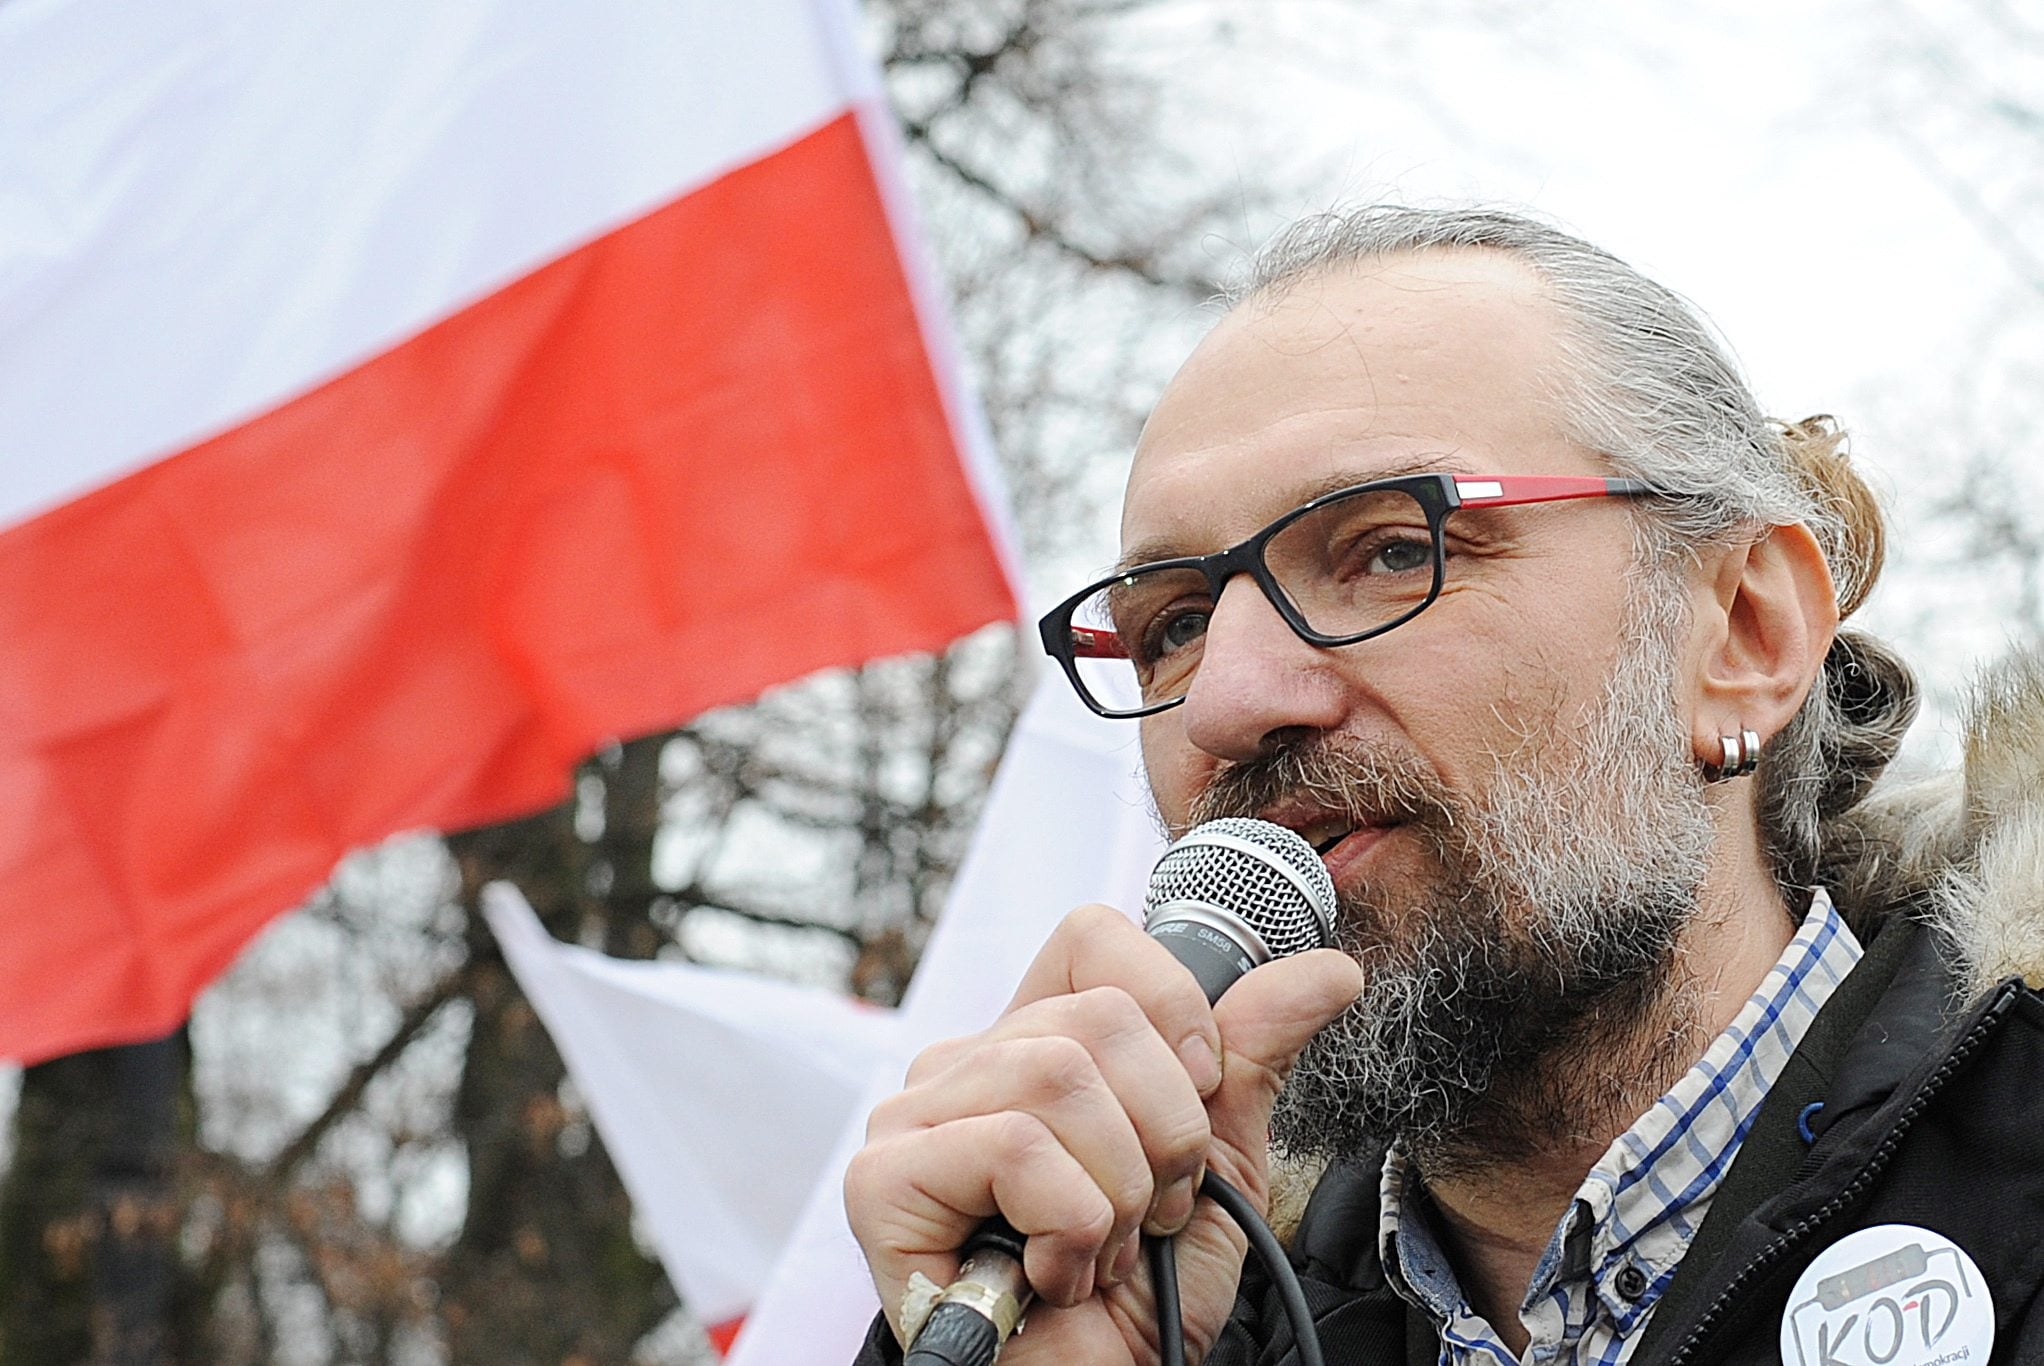 FILE - A  Dec. 19, 2015, file photo showingMateusz Kijowski, leader of the Committee for the Defense of Democracy, speaking at a demonstration in Warsaw, Poland. Kijowski?s group, which is supported by many former Solidarity activists and embraces the same values of nonviolent resistance, has organized a string of protests over the past month that have brought many thousands of people to the streets.